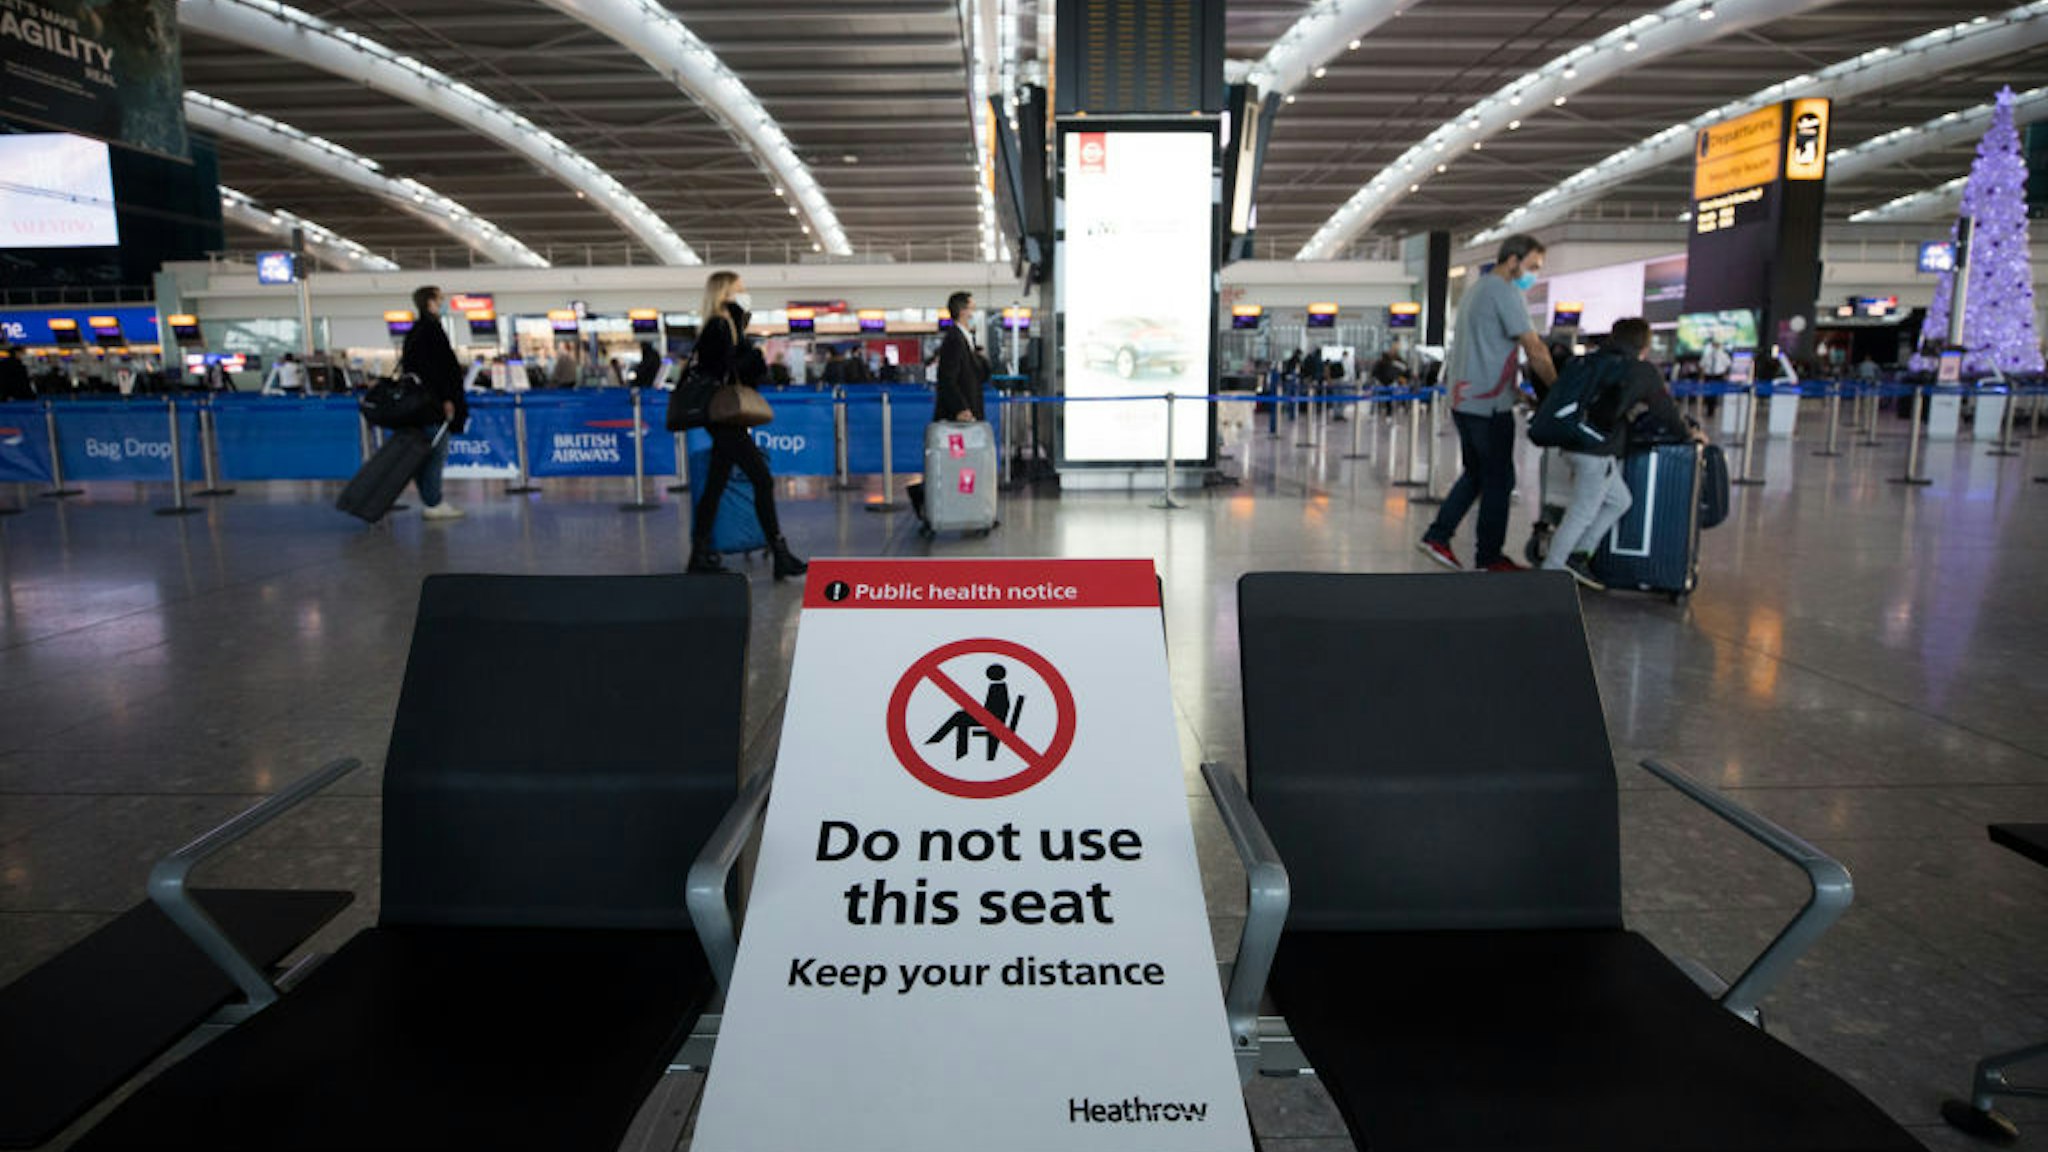 A social distancing sign on a seat in the check-in area in at London Heathrow Airport Ltd. in London, U.K., on Saturday, Dec. 19, 2020. The pandemic has put a third of all tourism jobs at risk, and airlines around the world have said they need as much as $200 billion in bailouts.